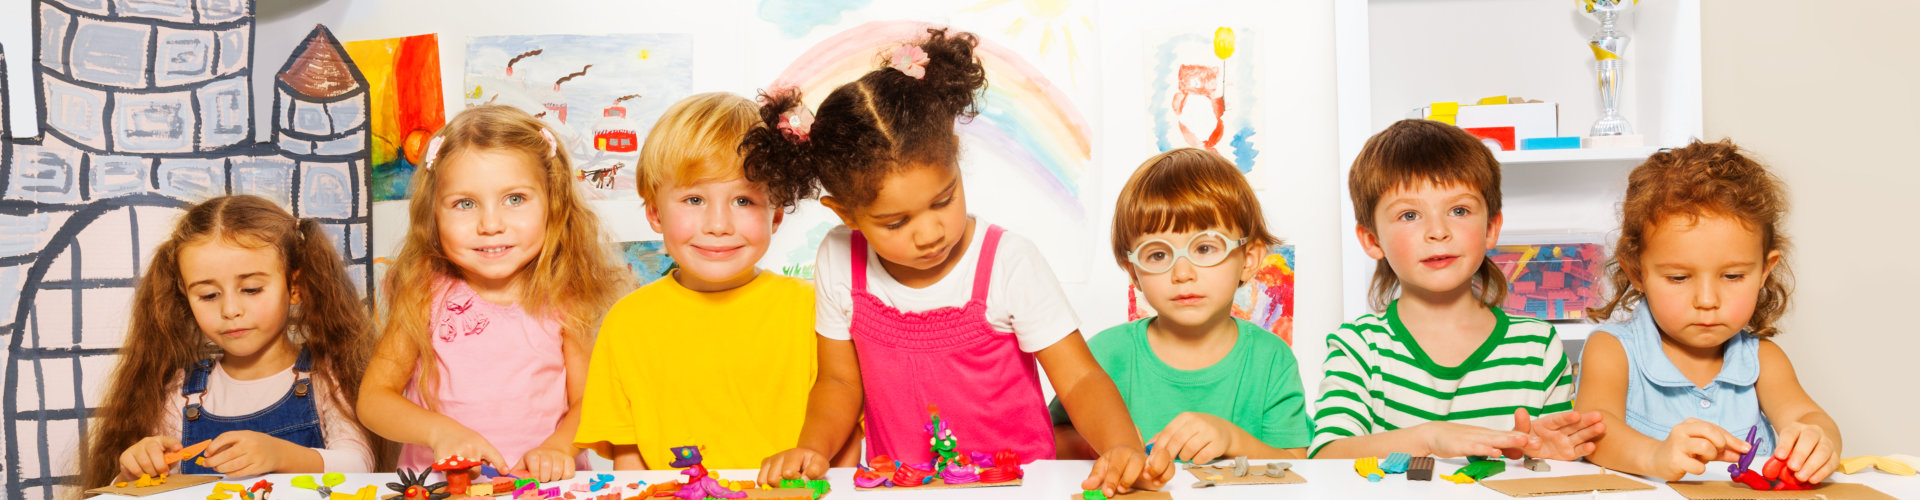 a group of preschool boys and girls play with modeling clay in class